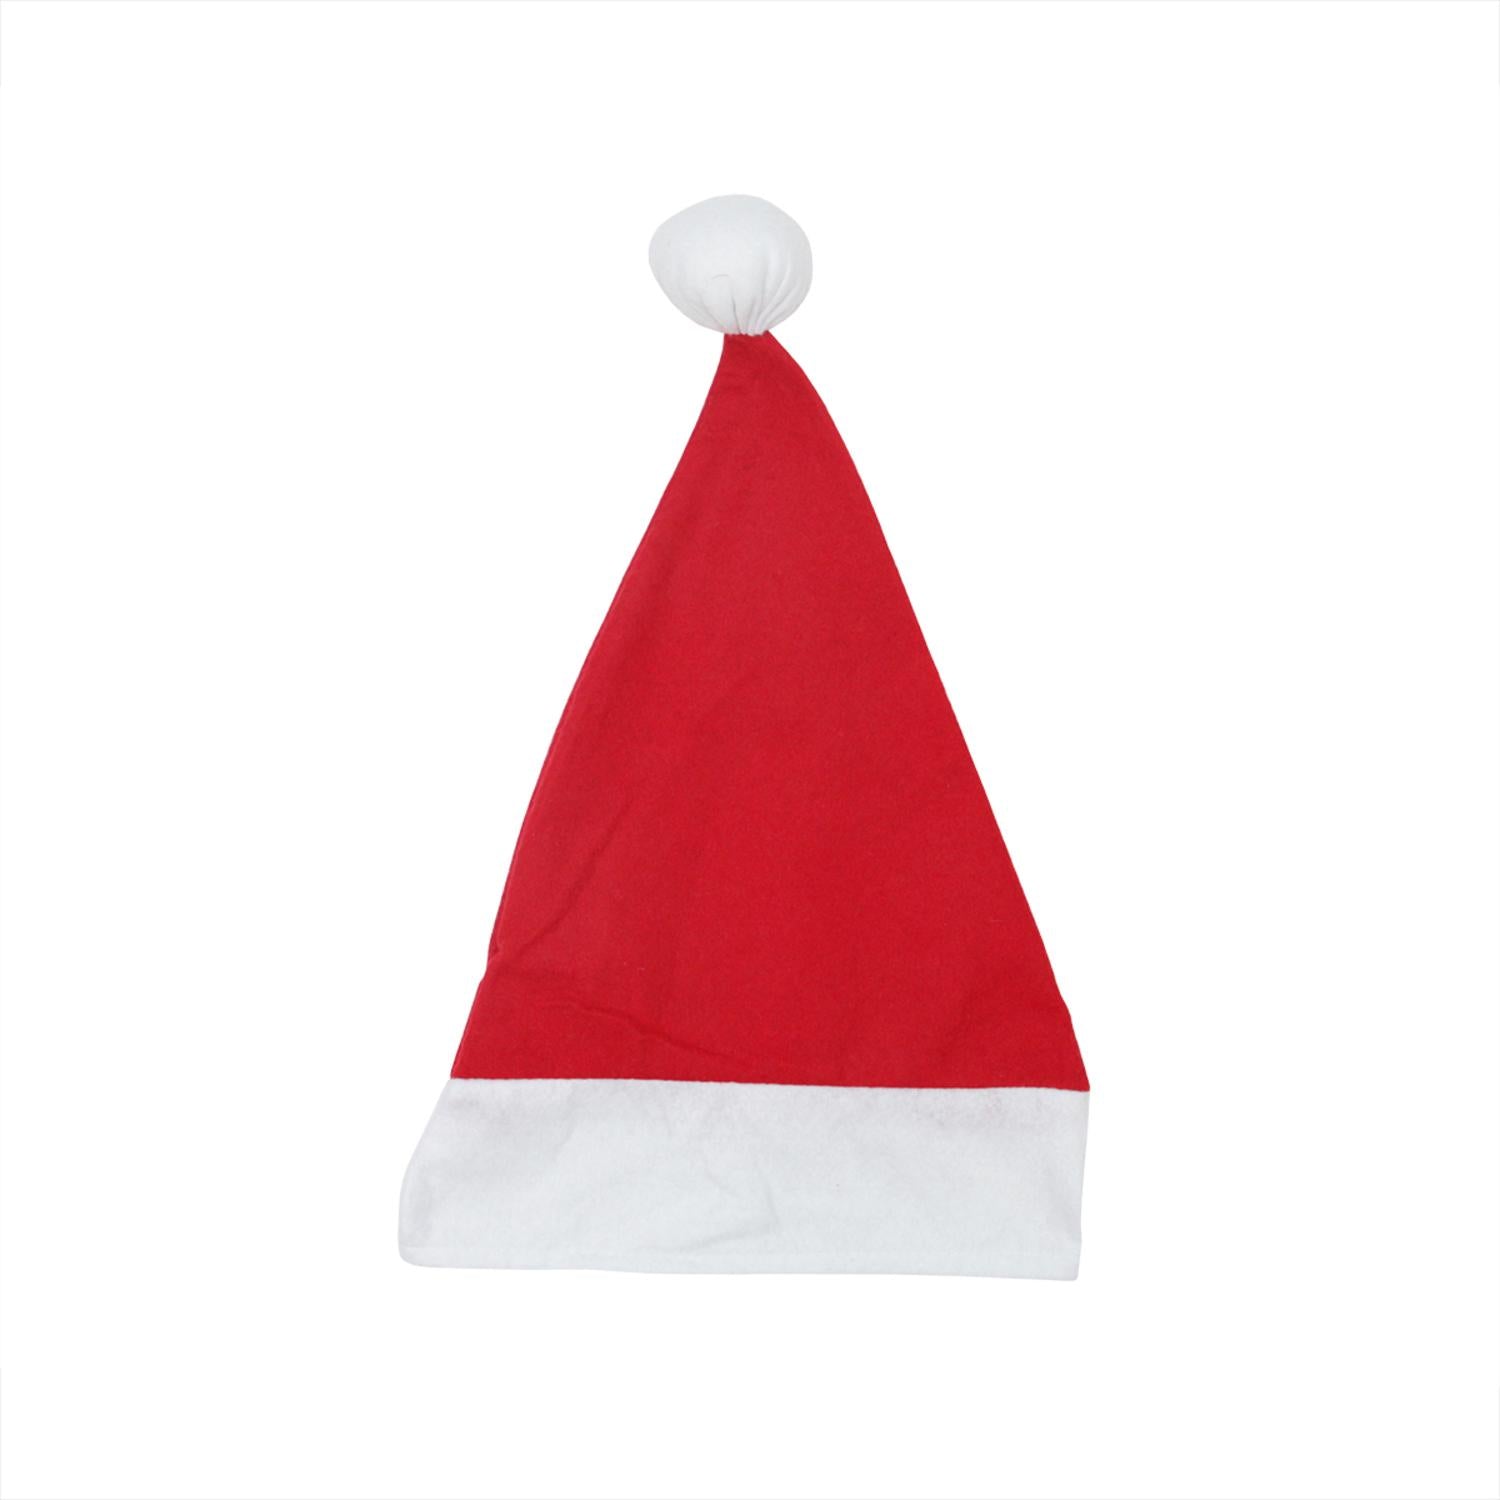 18" Traditional Red and White Felt Christmas Santa Hat - Adult Size Large